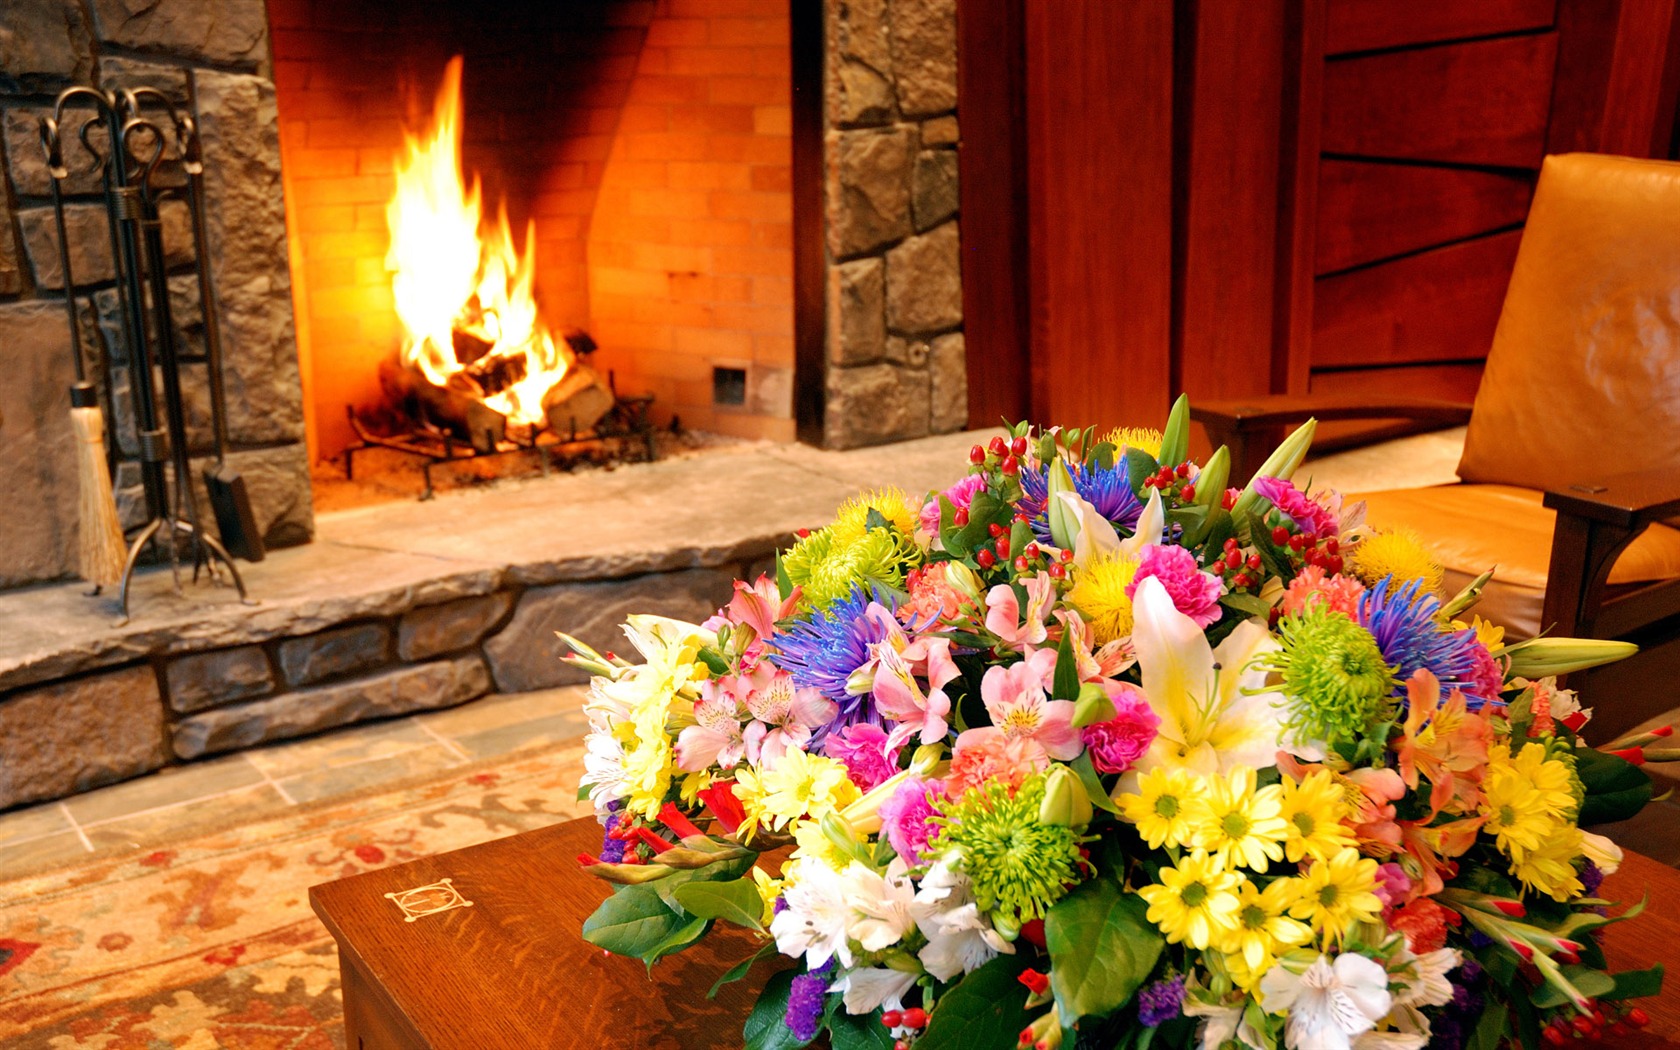 Western-style family fireplace wallpaper (1) #1 - 1680x1050